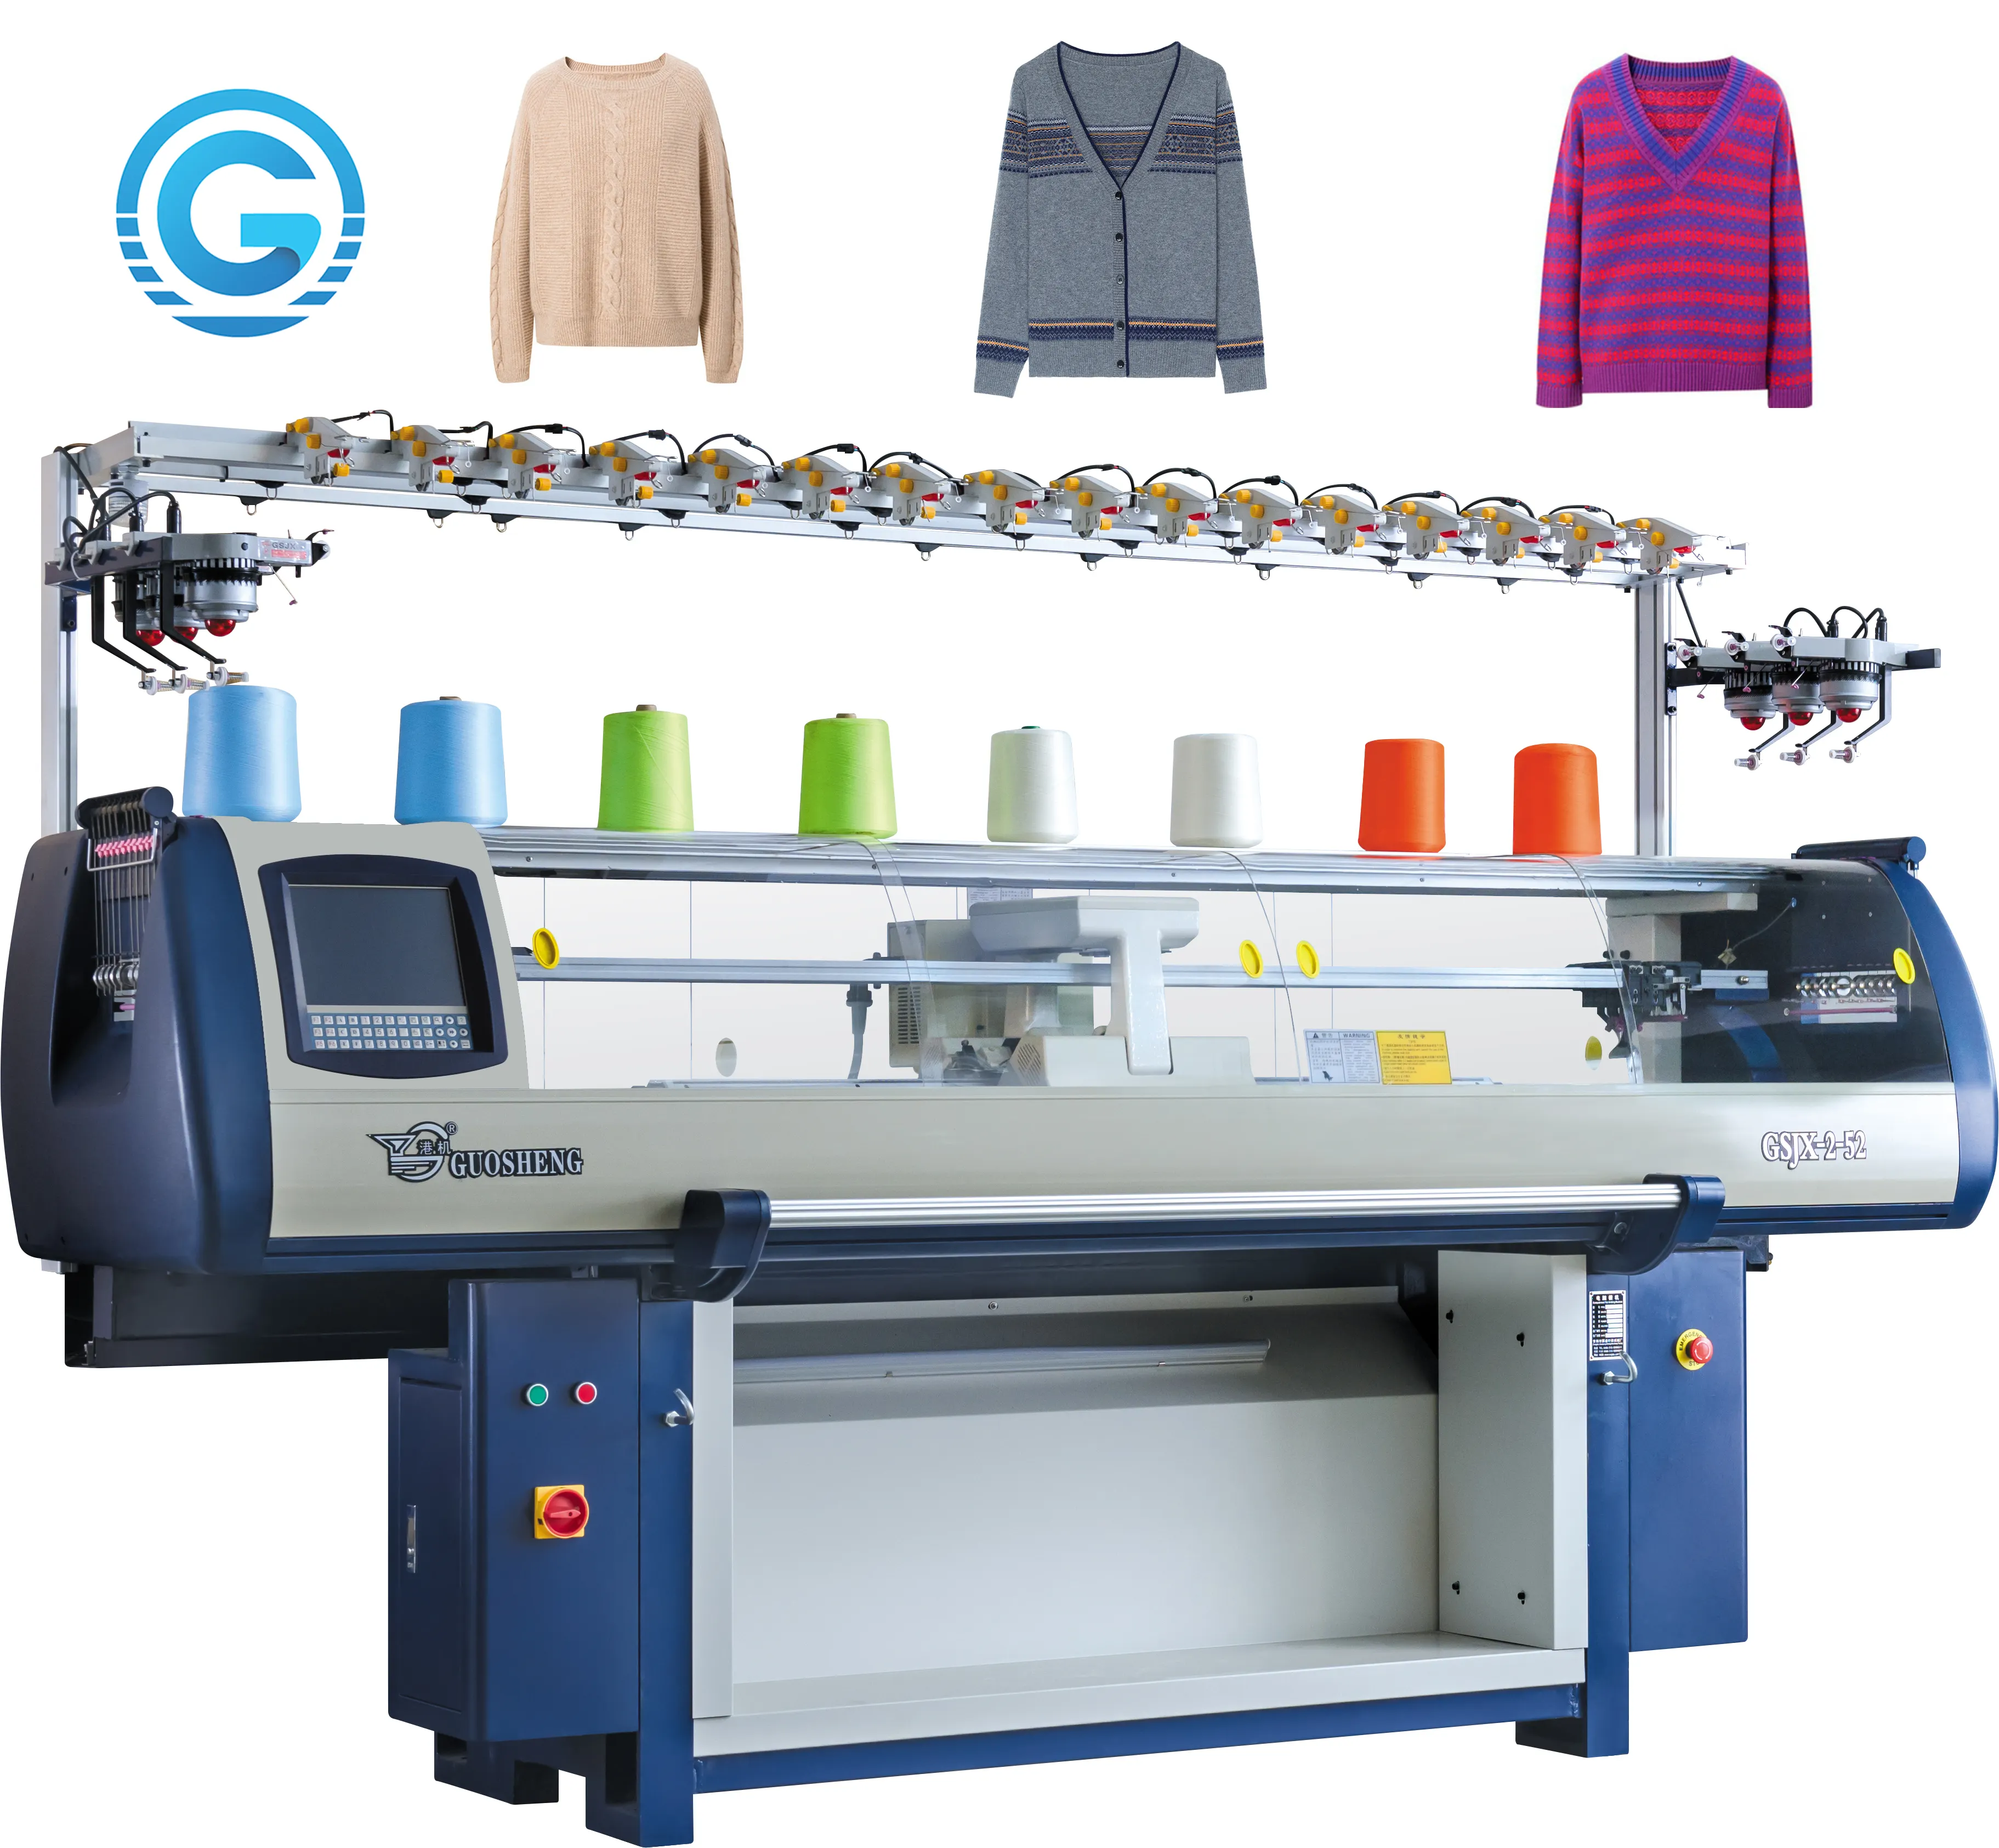 Fully Jacquard Industrial Football Fan Scarf Knitting Machine Manufacturers